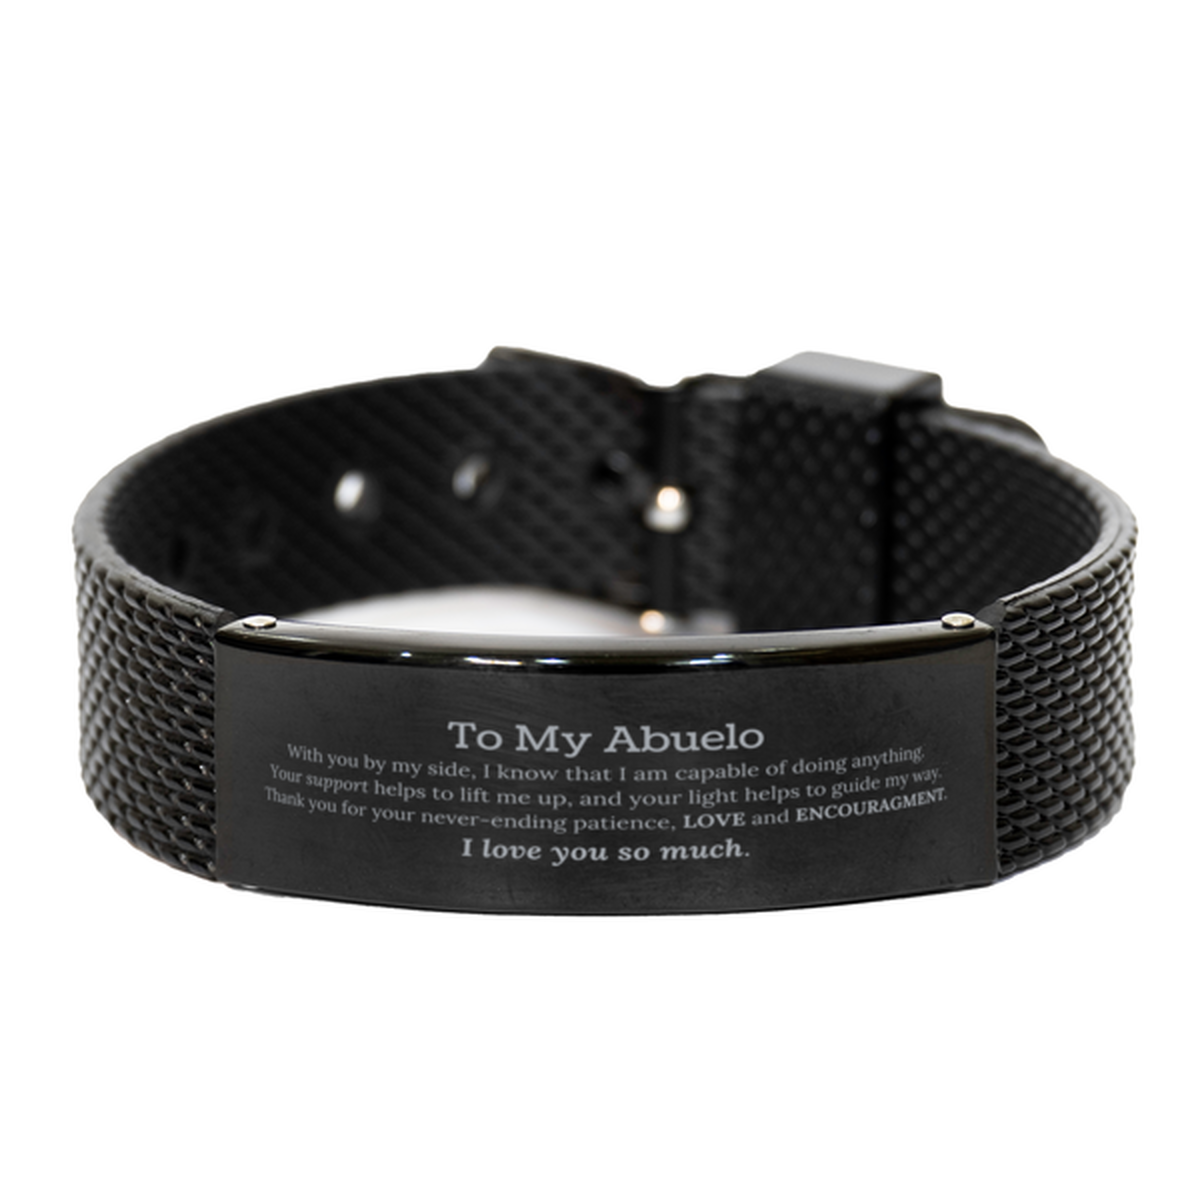 Appreciation Abuelo Black Shark Mesh Bracelet Gifts, To My Abuelo Birthday Christmas Wedding Keepsake Gifts for Abuelo With you by my side, I know that I am capable of doing anything. I love you so much